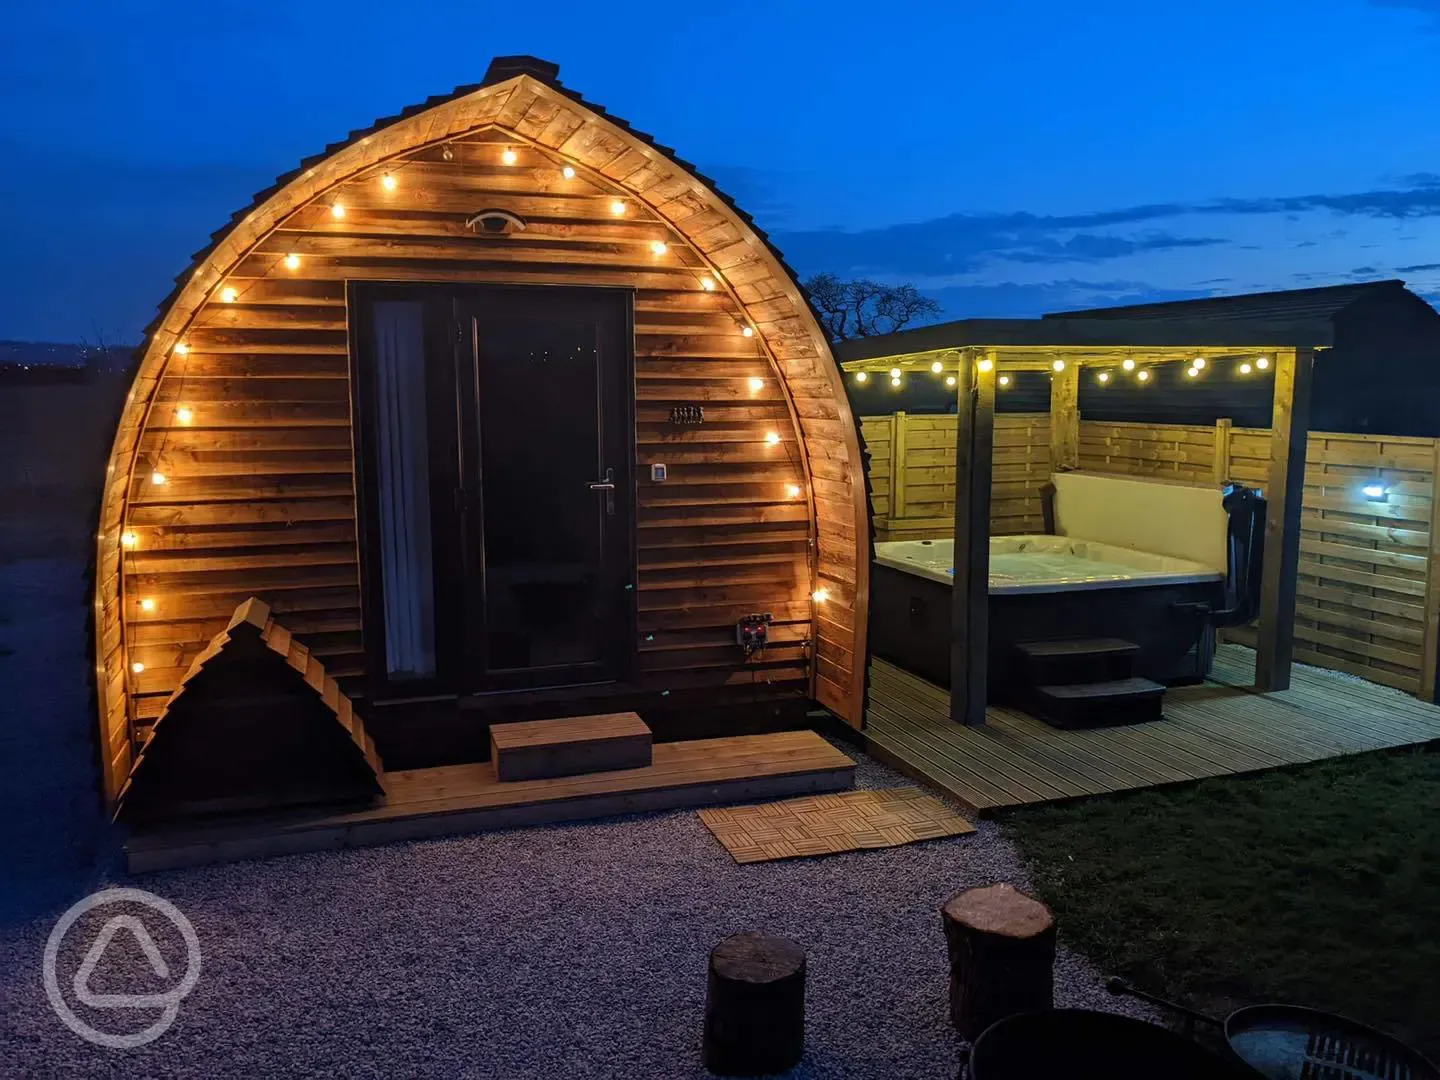 Ensuite Deluxe Wigwam Pod with wood-fired hot tub at night